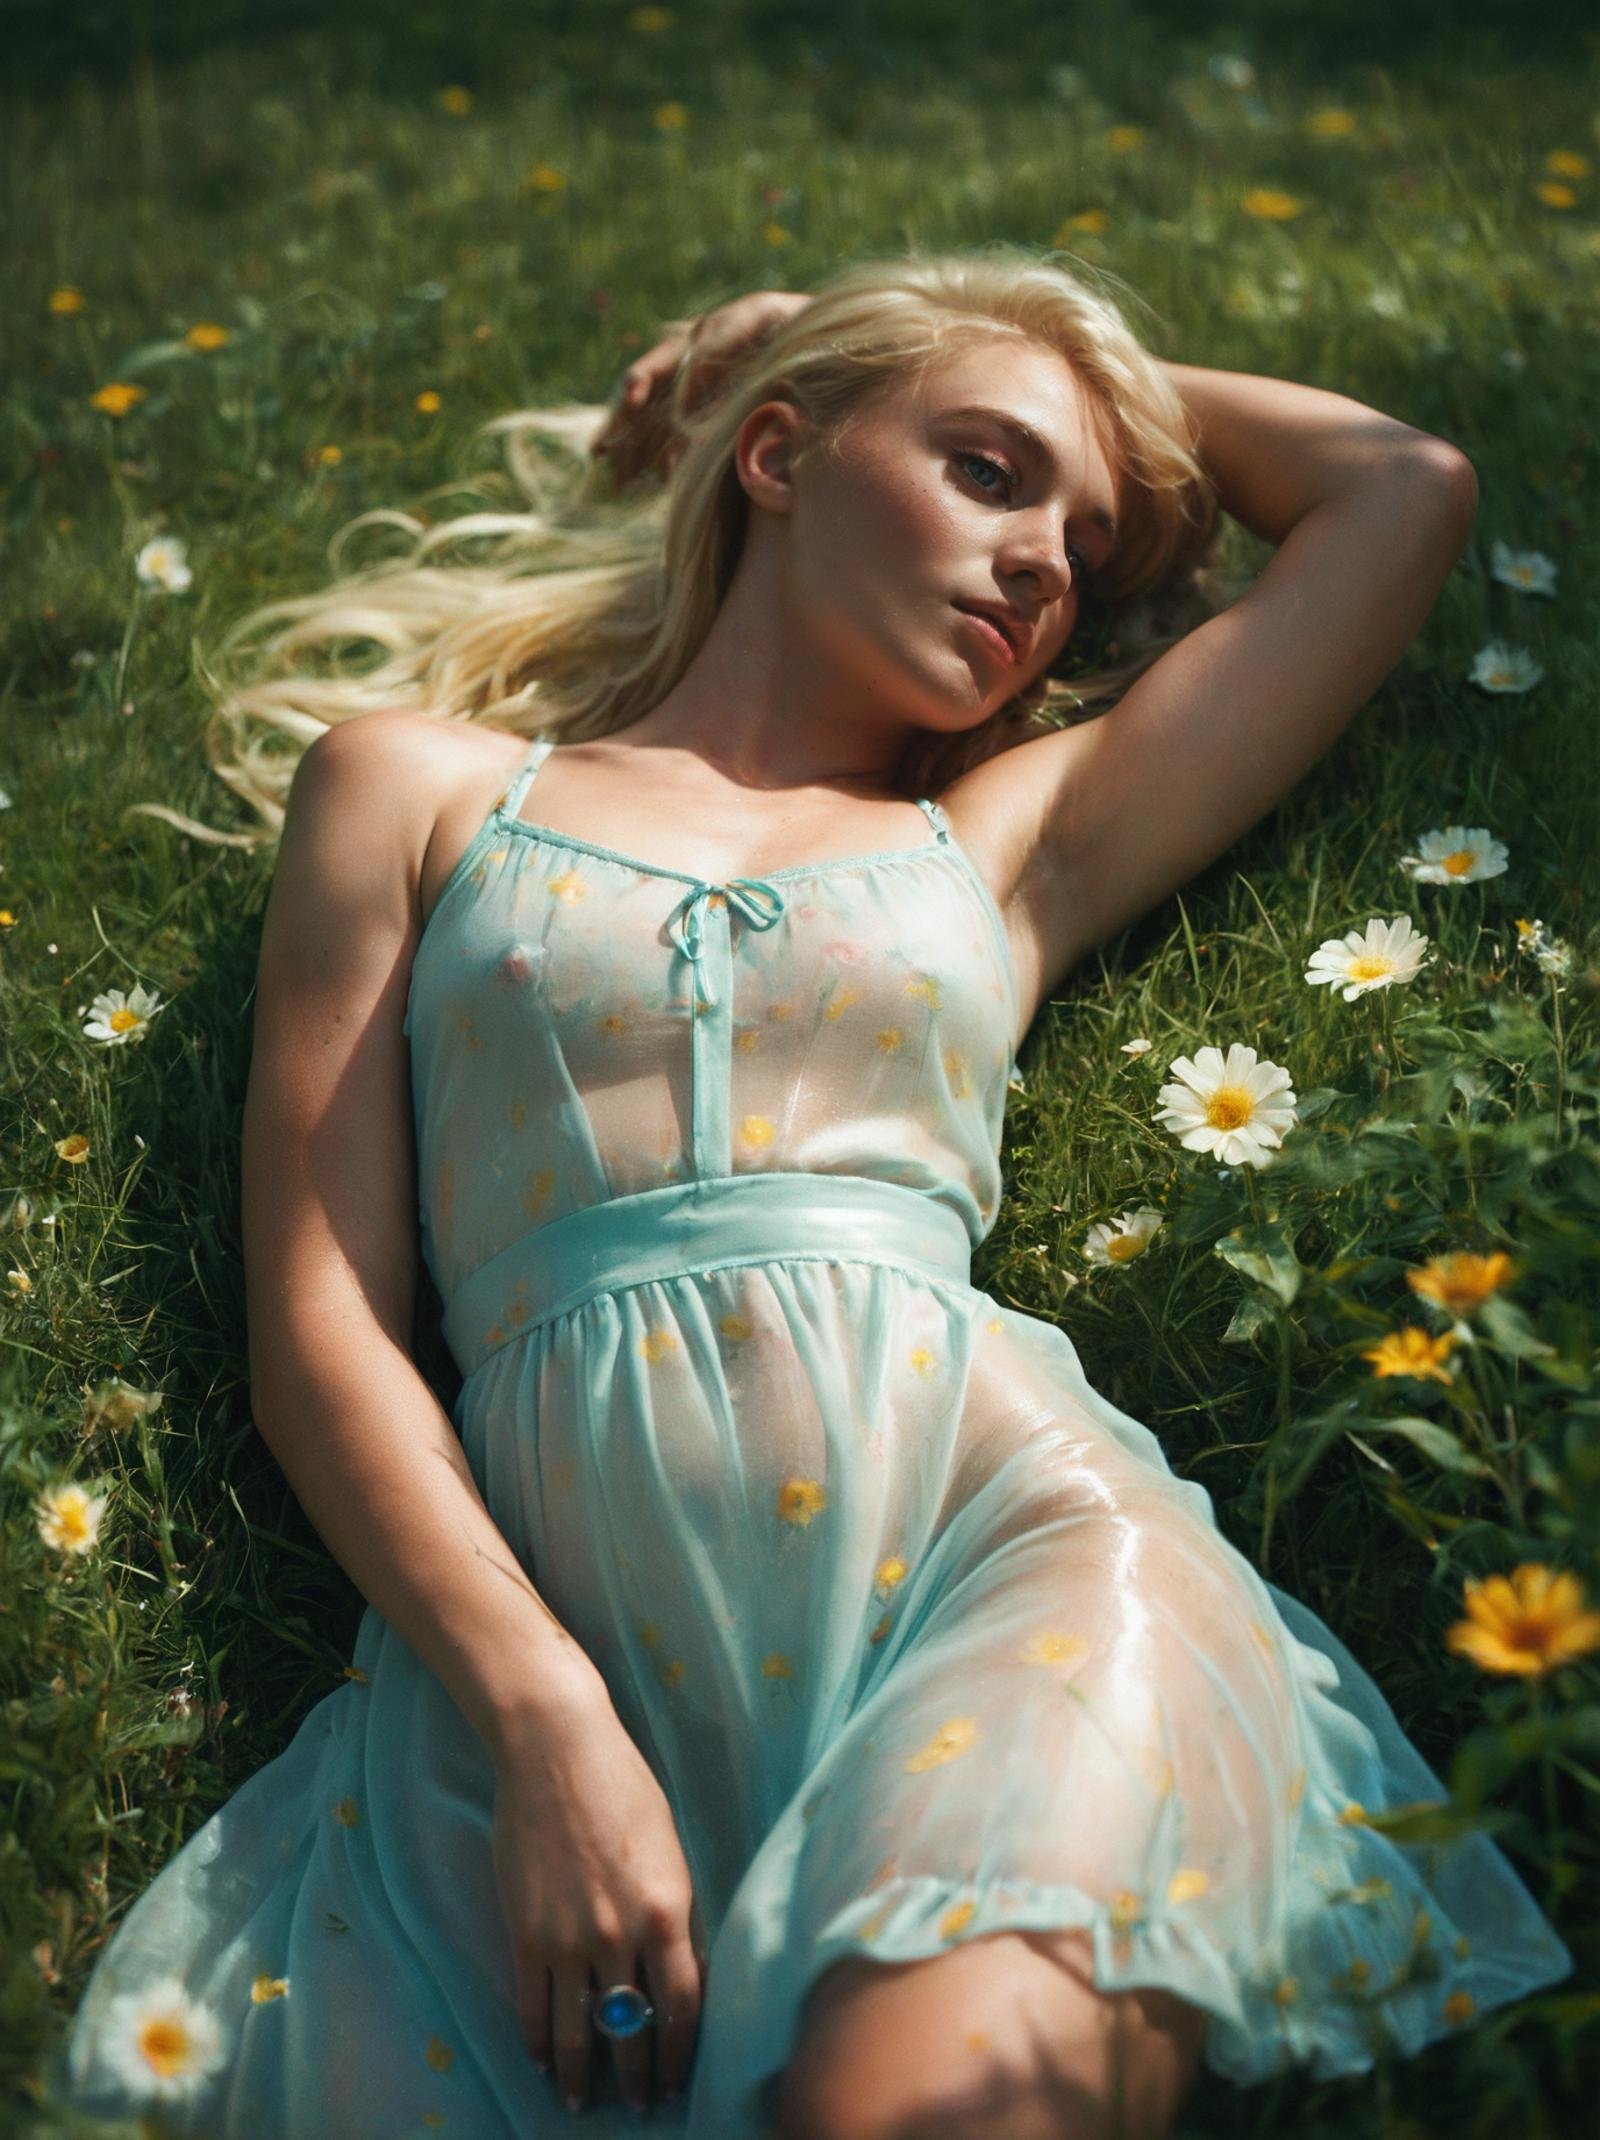 score_9, score_8_up,score_7_up, realistic, solo, 1girl, a gorgeous, feminine, feminine face, woman, long blonde hair, makeup,  wearing see-through summer dress, laying on the grass, sunny, lens flare, summer, flowers